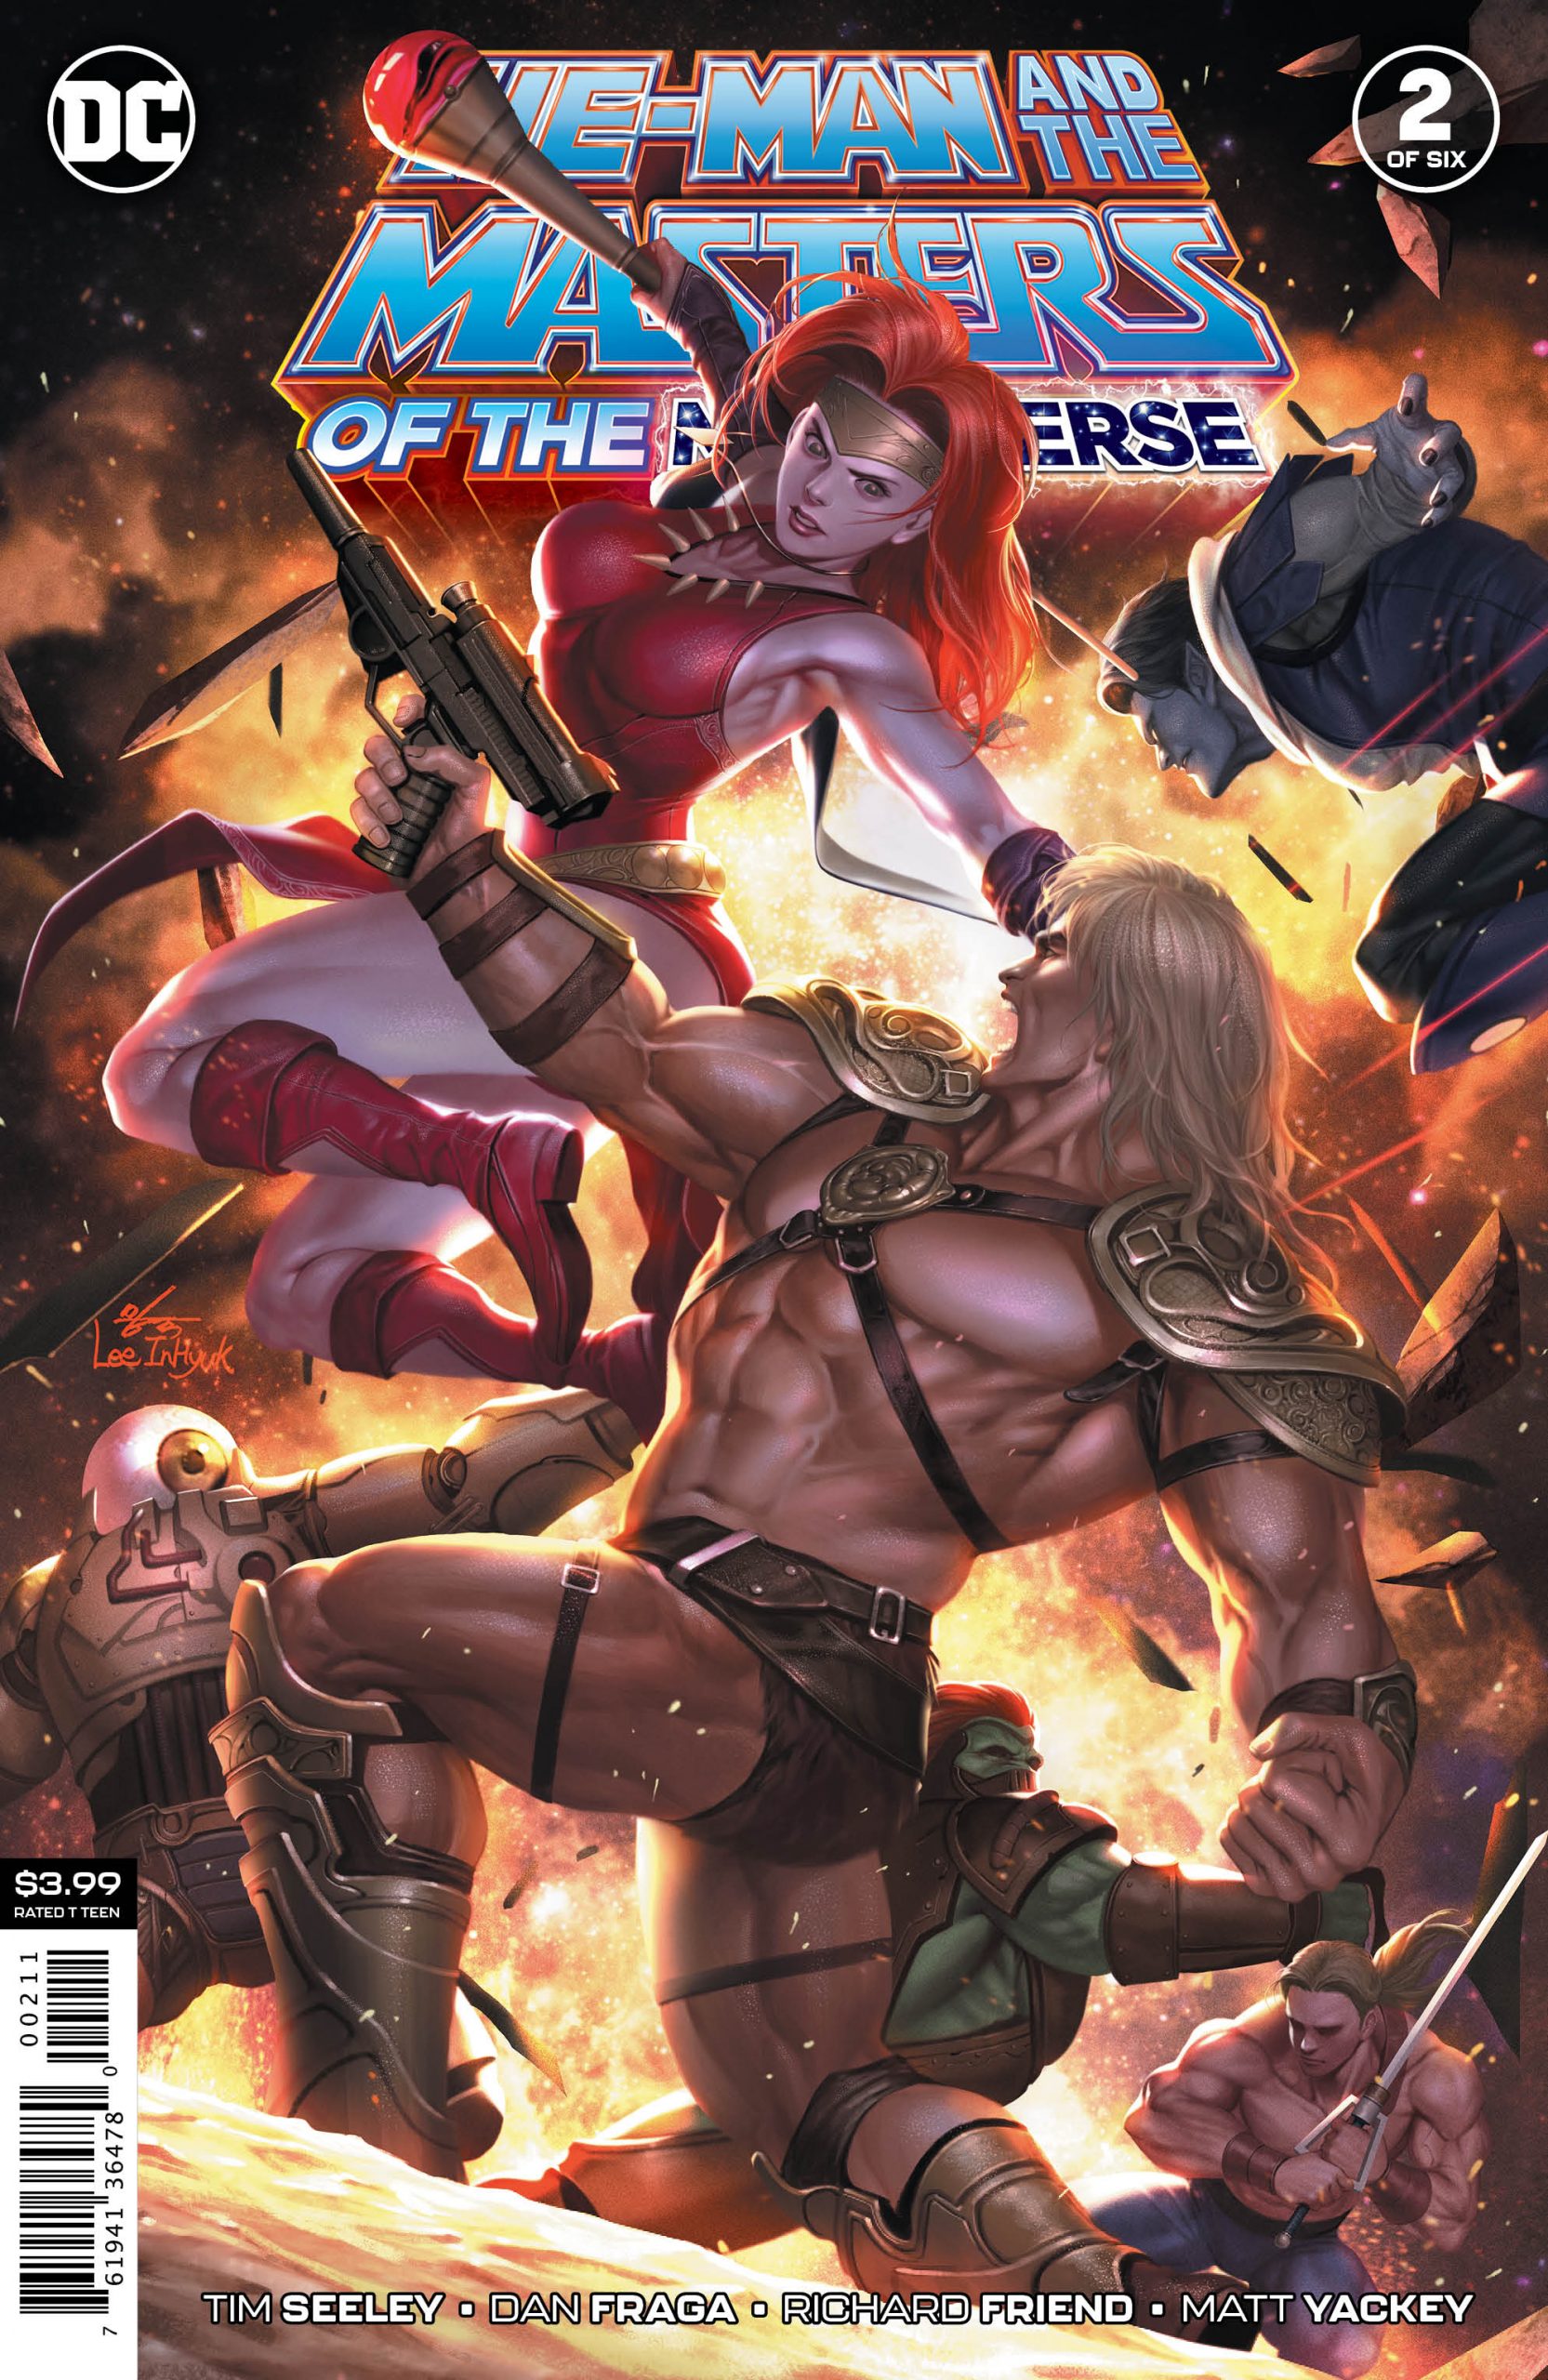 He-Man and the masters of the Multiverse #2